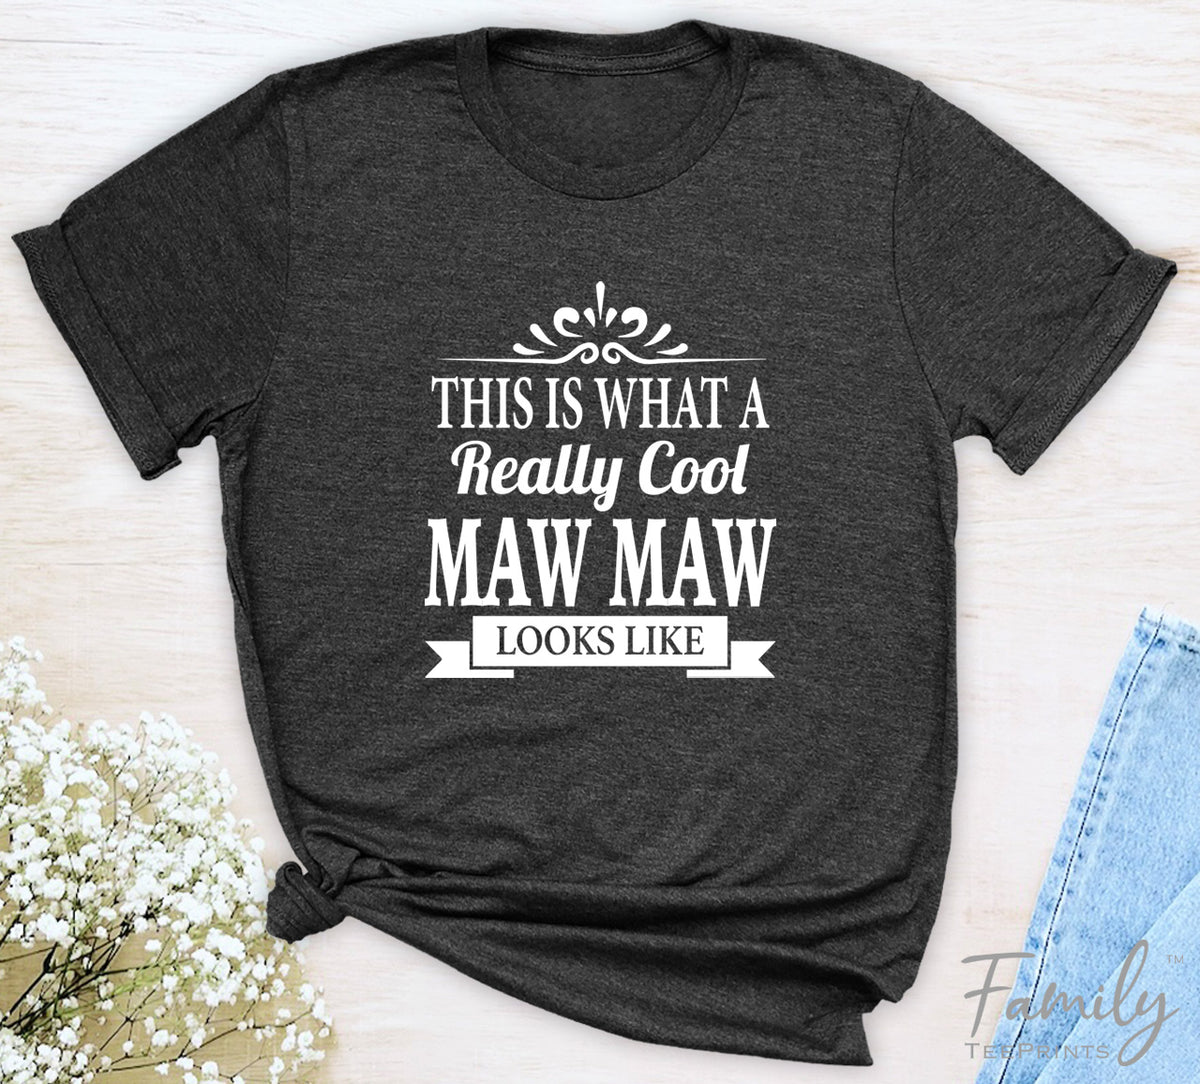 This Is What A Really Cool Maw Maw Looks Like - Unisex T-shirt - Maw Maw Shirt - Gift For Maw Maw - familyteeprints